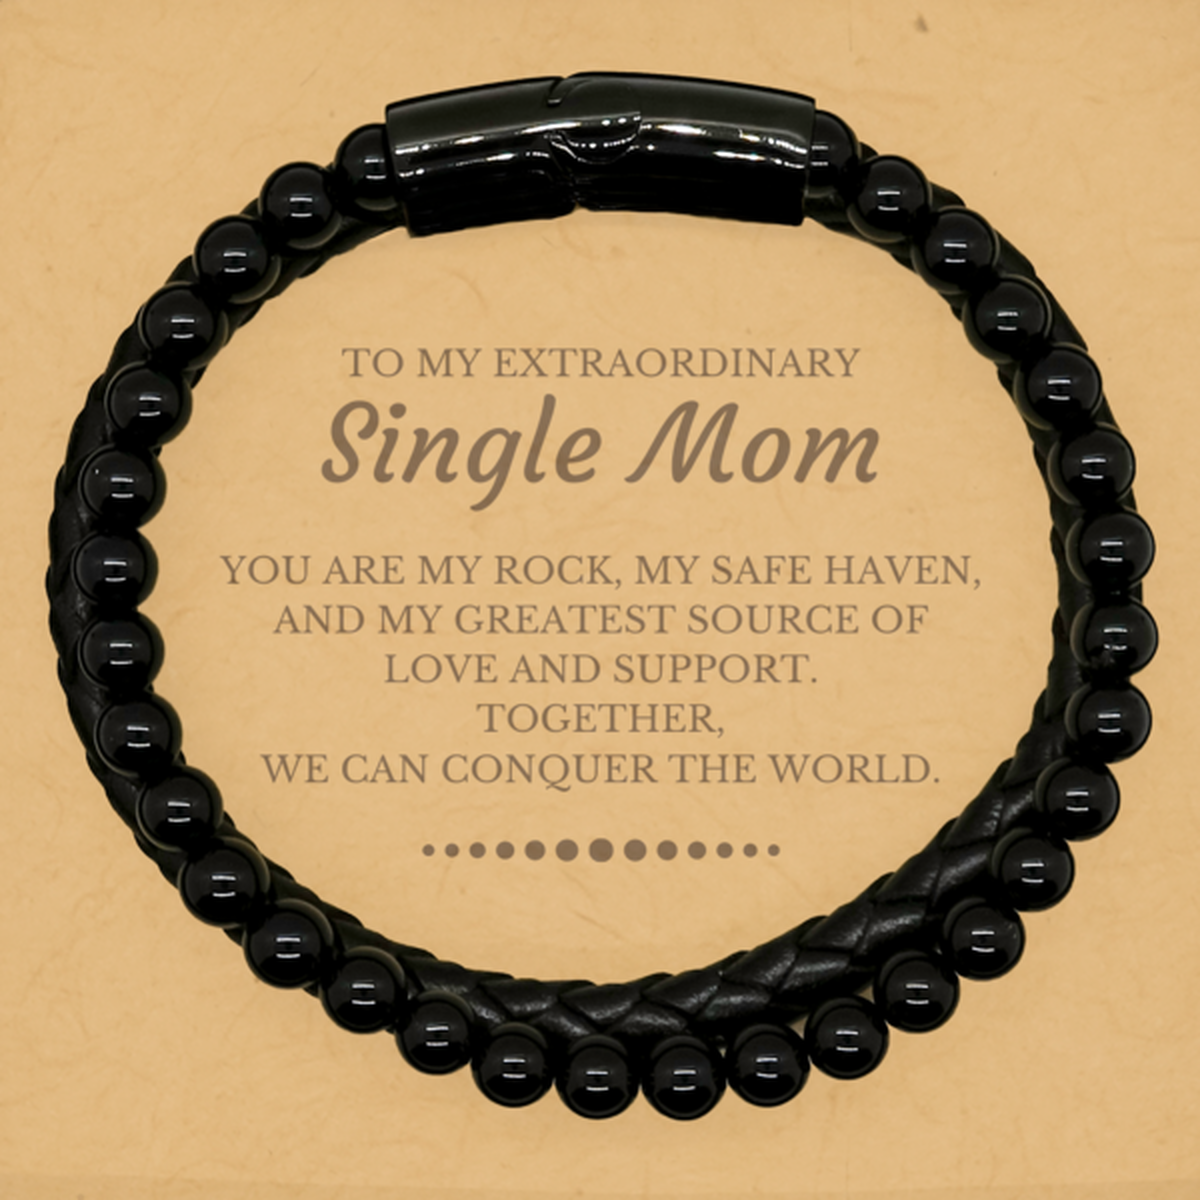 To My Extraordinary Single Mom Gifts, Together, we can conquer the world, Birthday Stone Leather Bracelets For Single Mom, Christmas Gifts For Single Mom